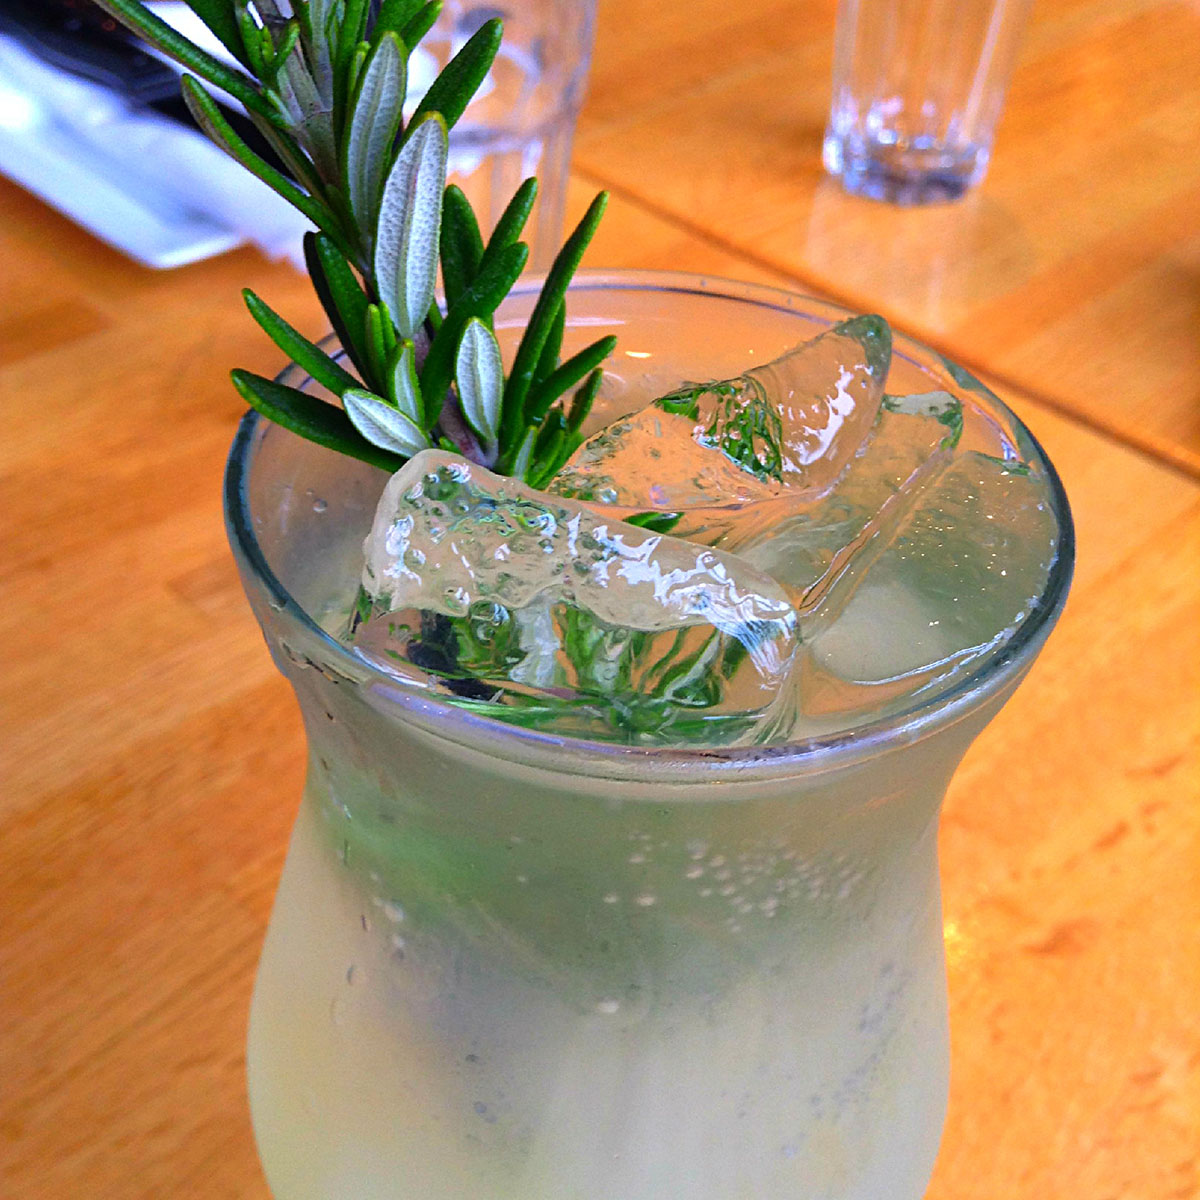 Rosemary Yuzu Limeade at the Tip Tap Room